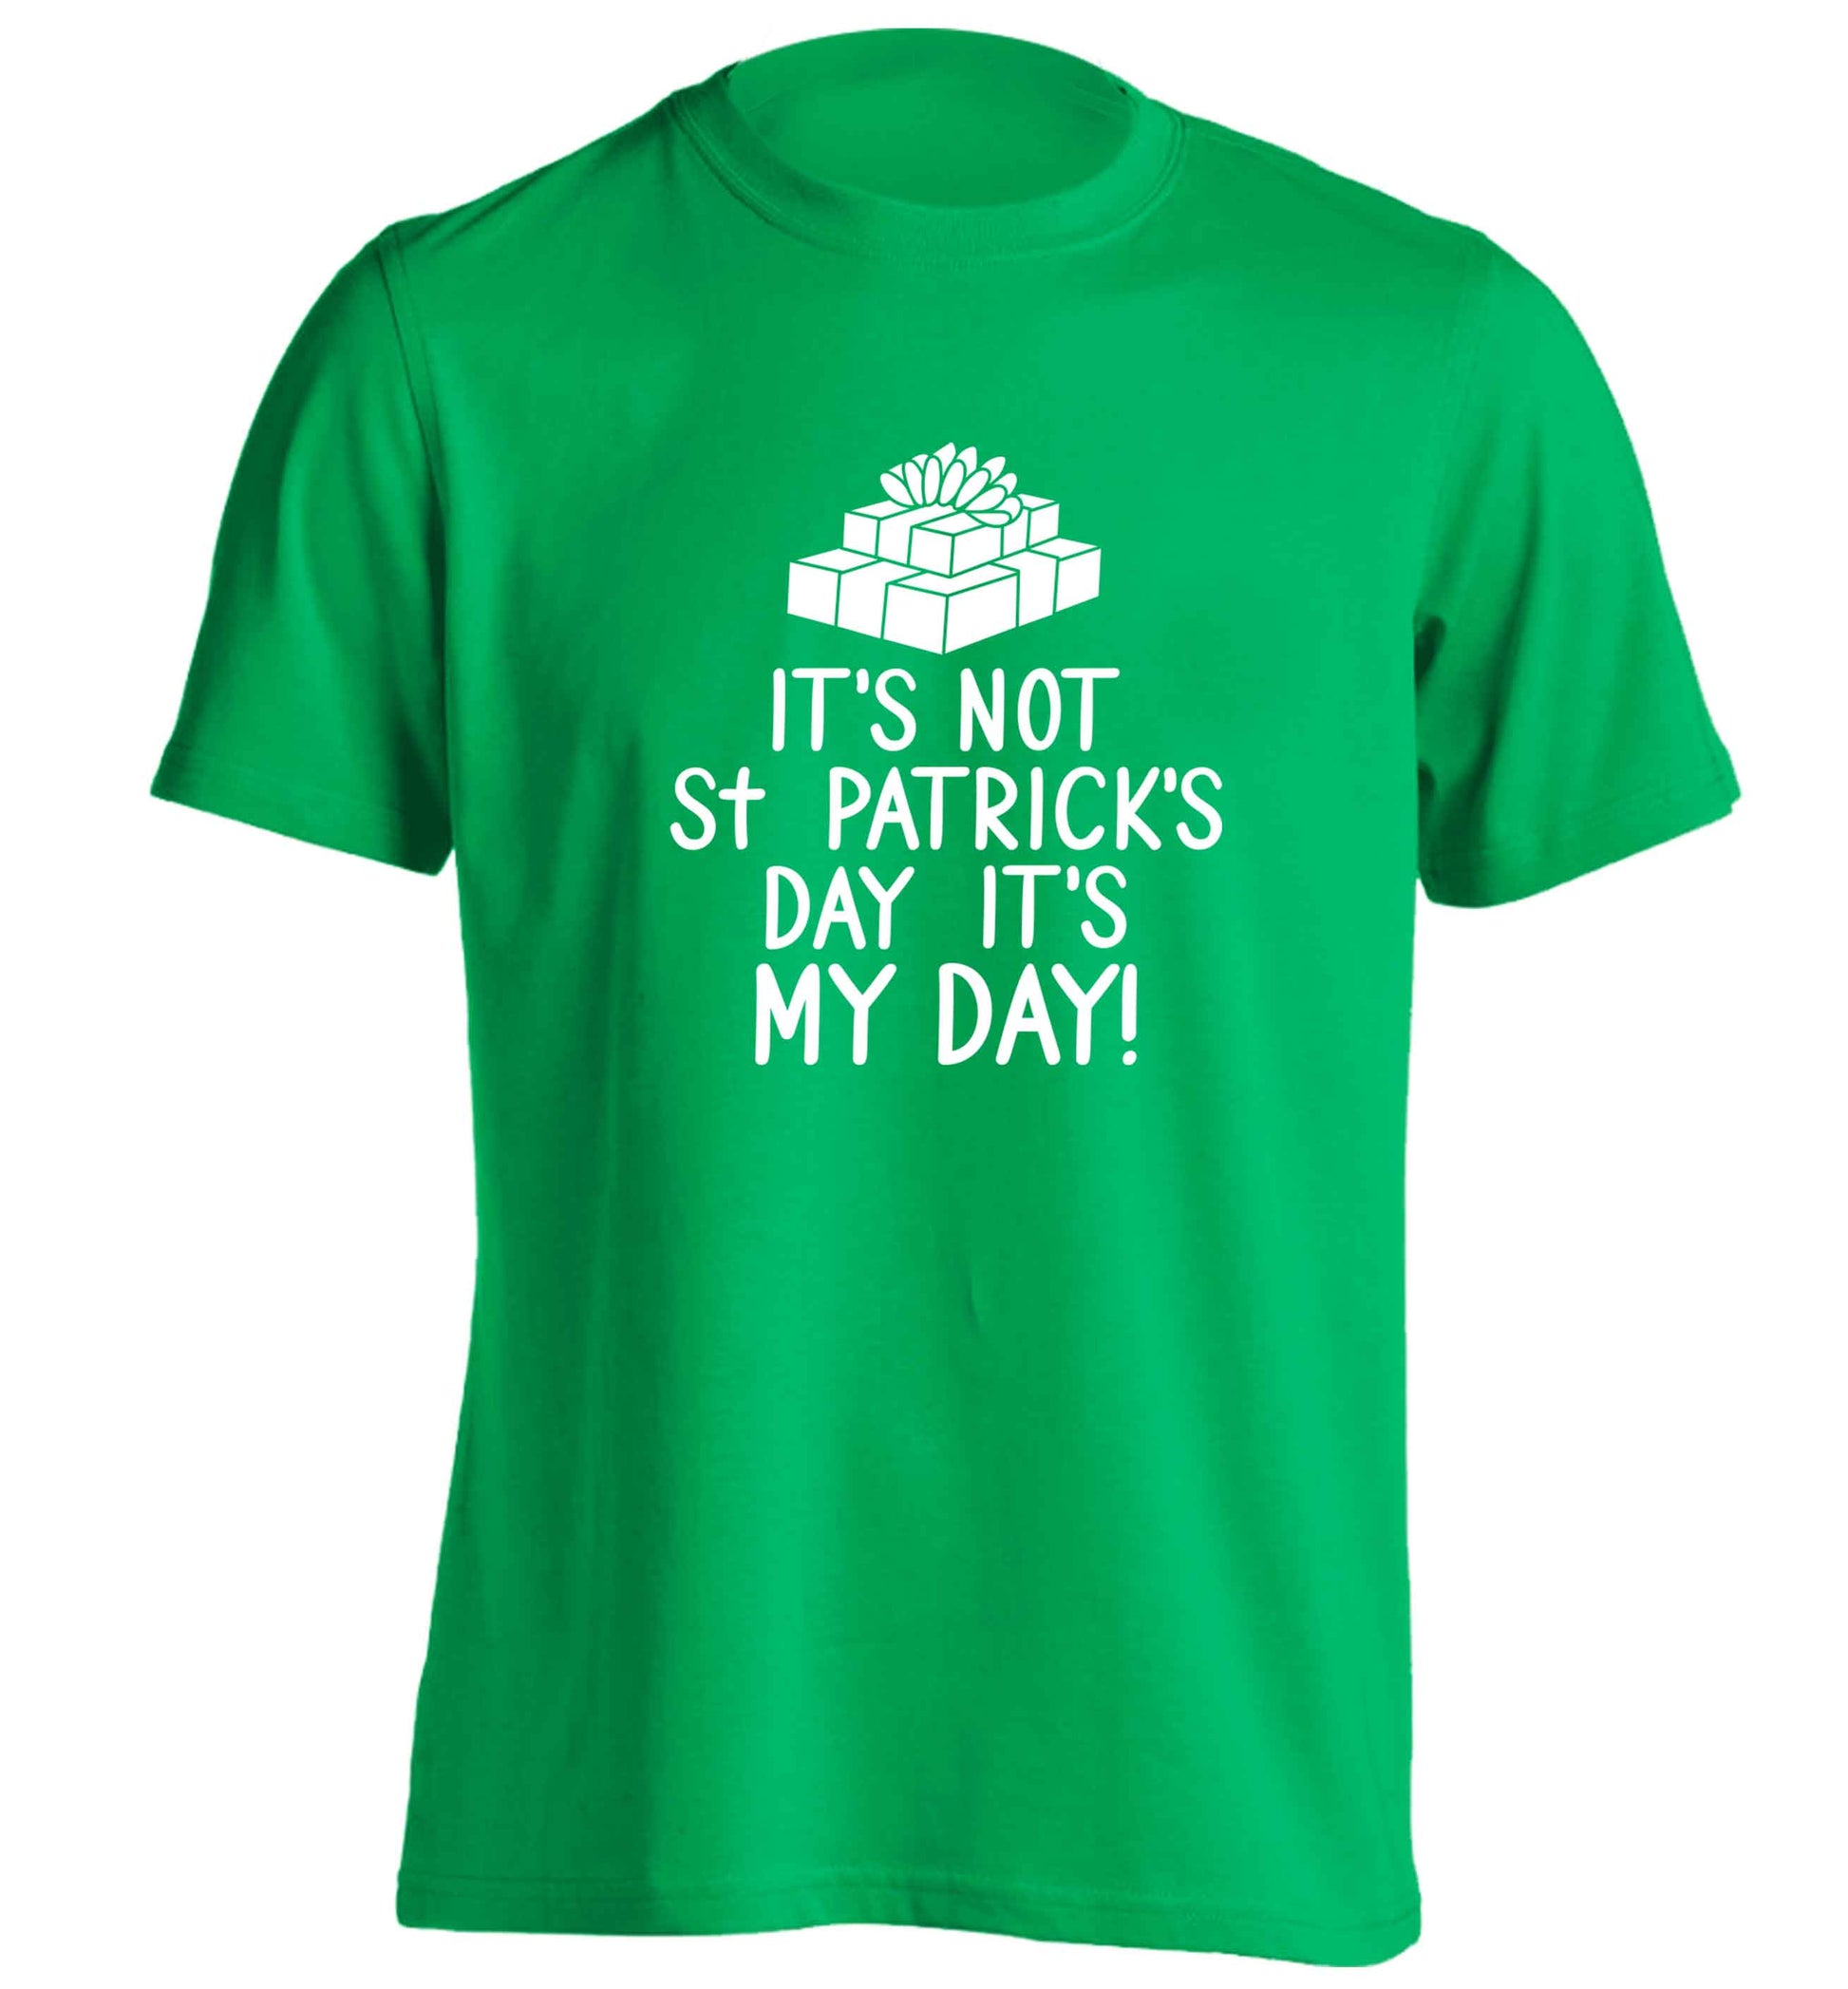 Funny gifts for your mum on mother's dayor her birthday! It's not St Patricks day it's my day adults unisex green Tshirt 2XL